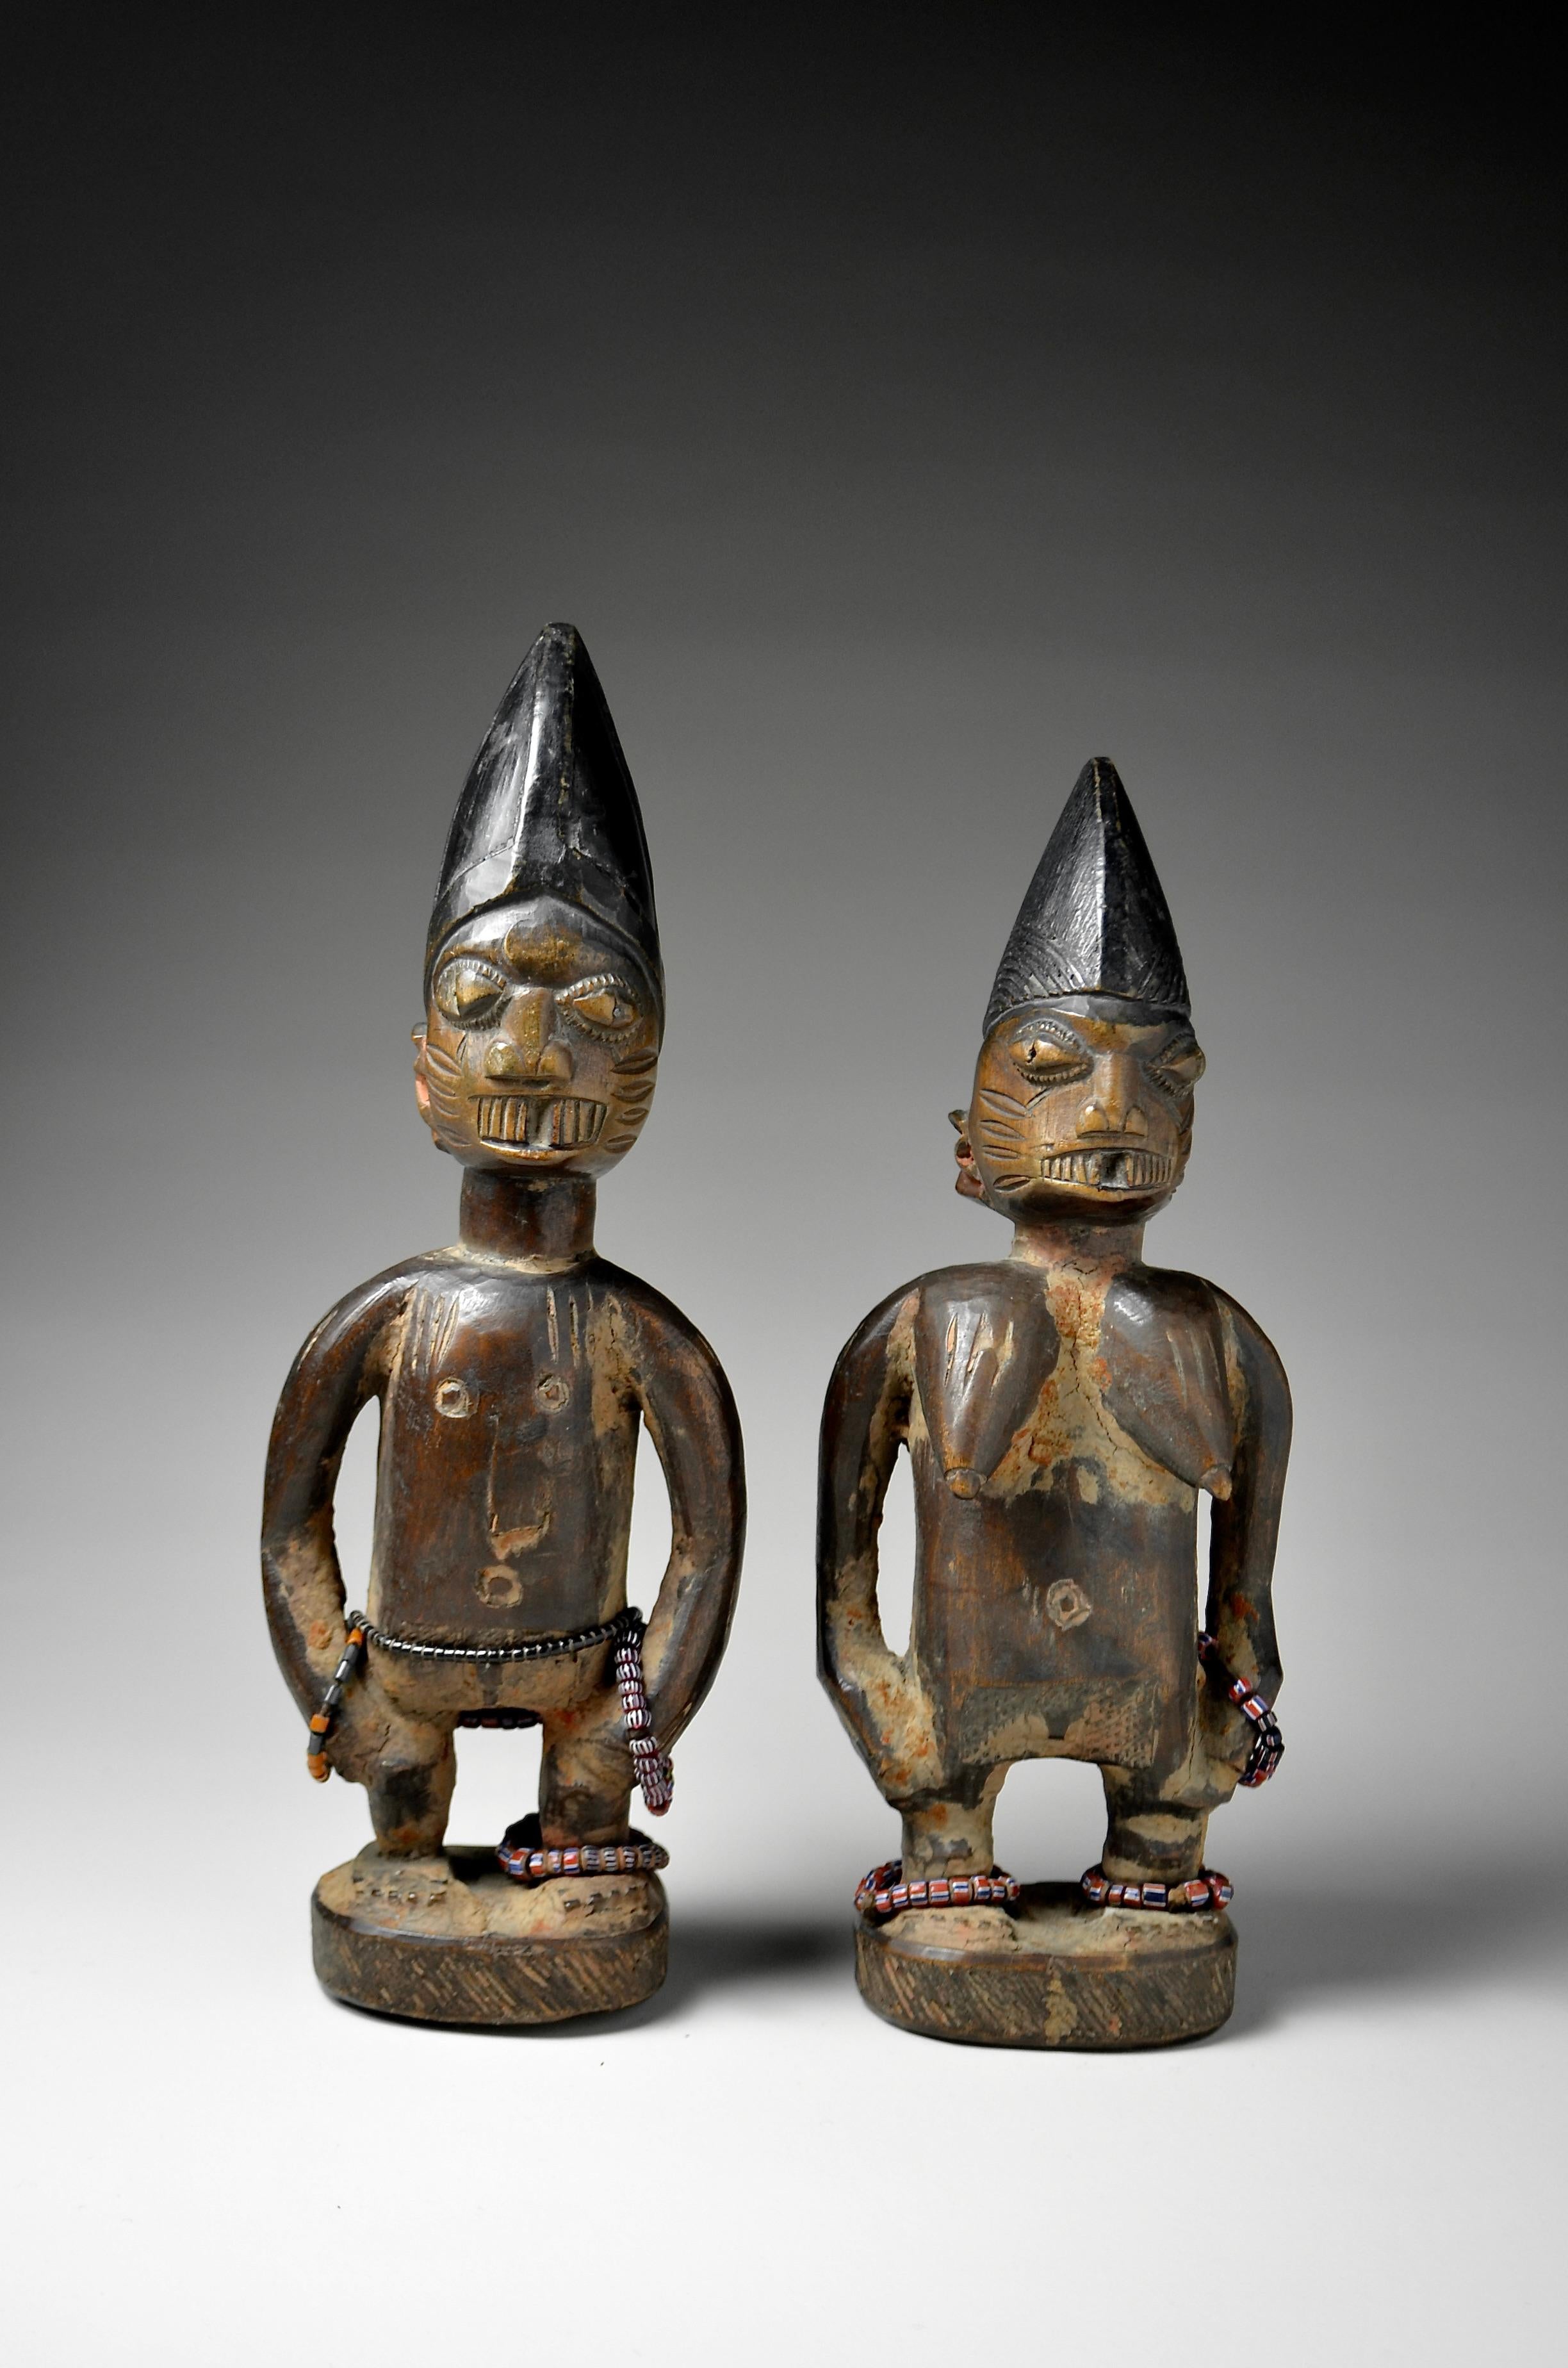 Ibeji pair
Ajasse
Nigeria 
Wood, beads, pigment, offering remains
26.5cm and 25cm

ex Beatrice Leutert and Marcel Plüss collection, Thurgau, Switzerland